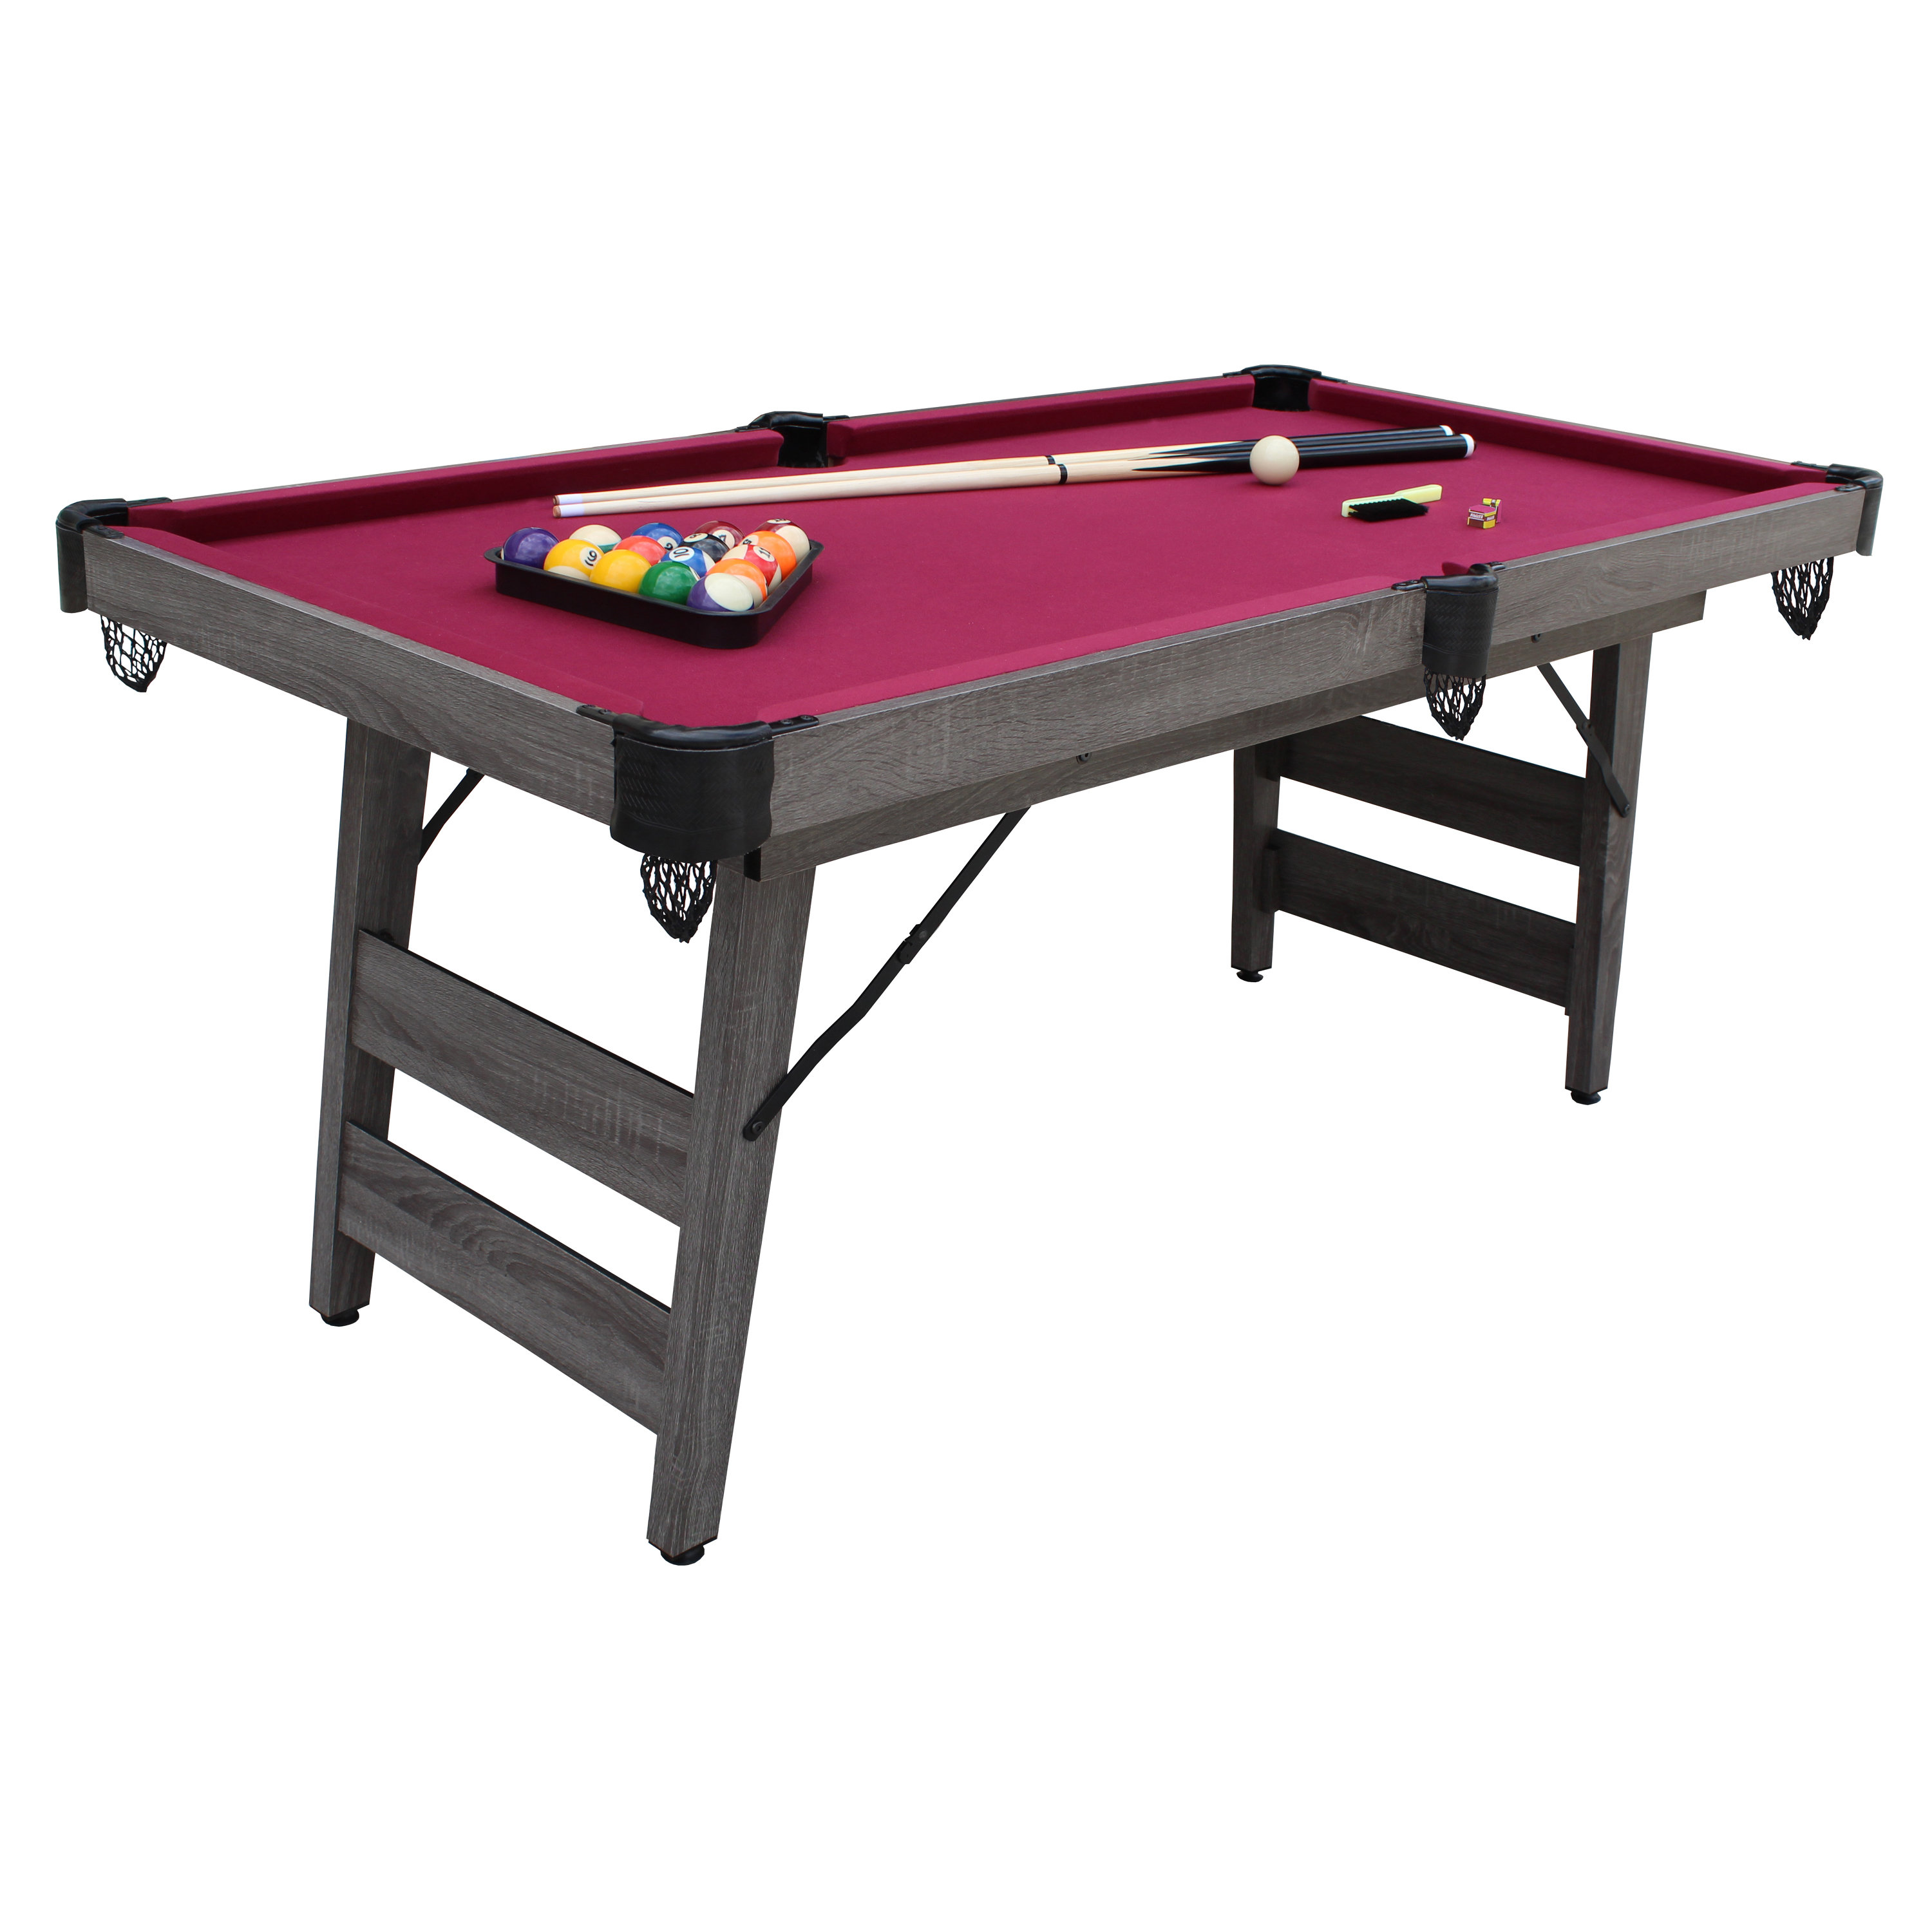 GoSports 8 ft Pool Table with Wood Finish - Modern Billiards Table with 2  Cue Sticks, Balls, Rack, Felt Brush and Chalk